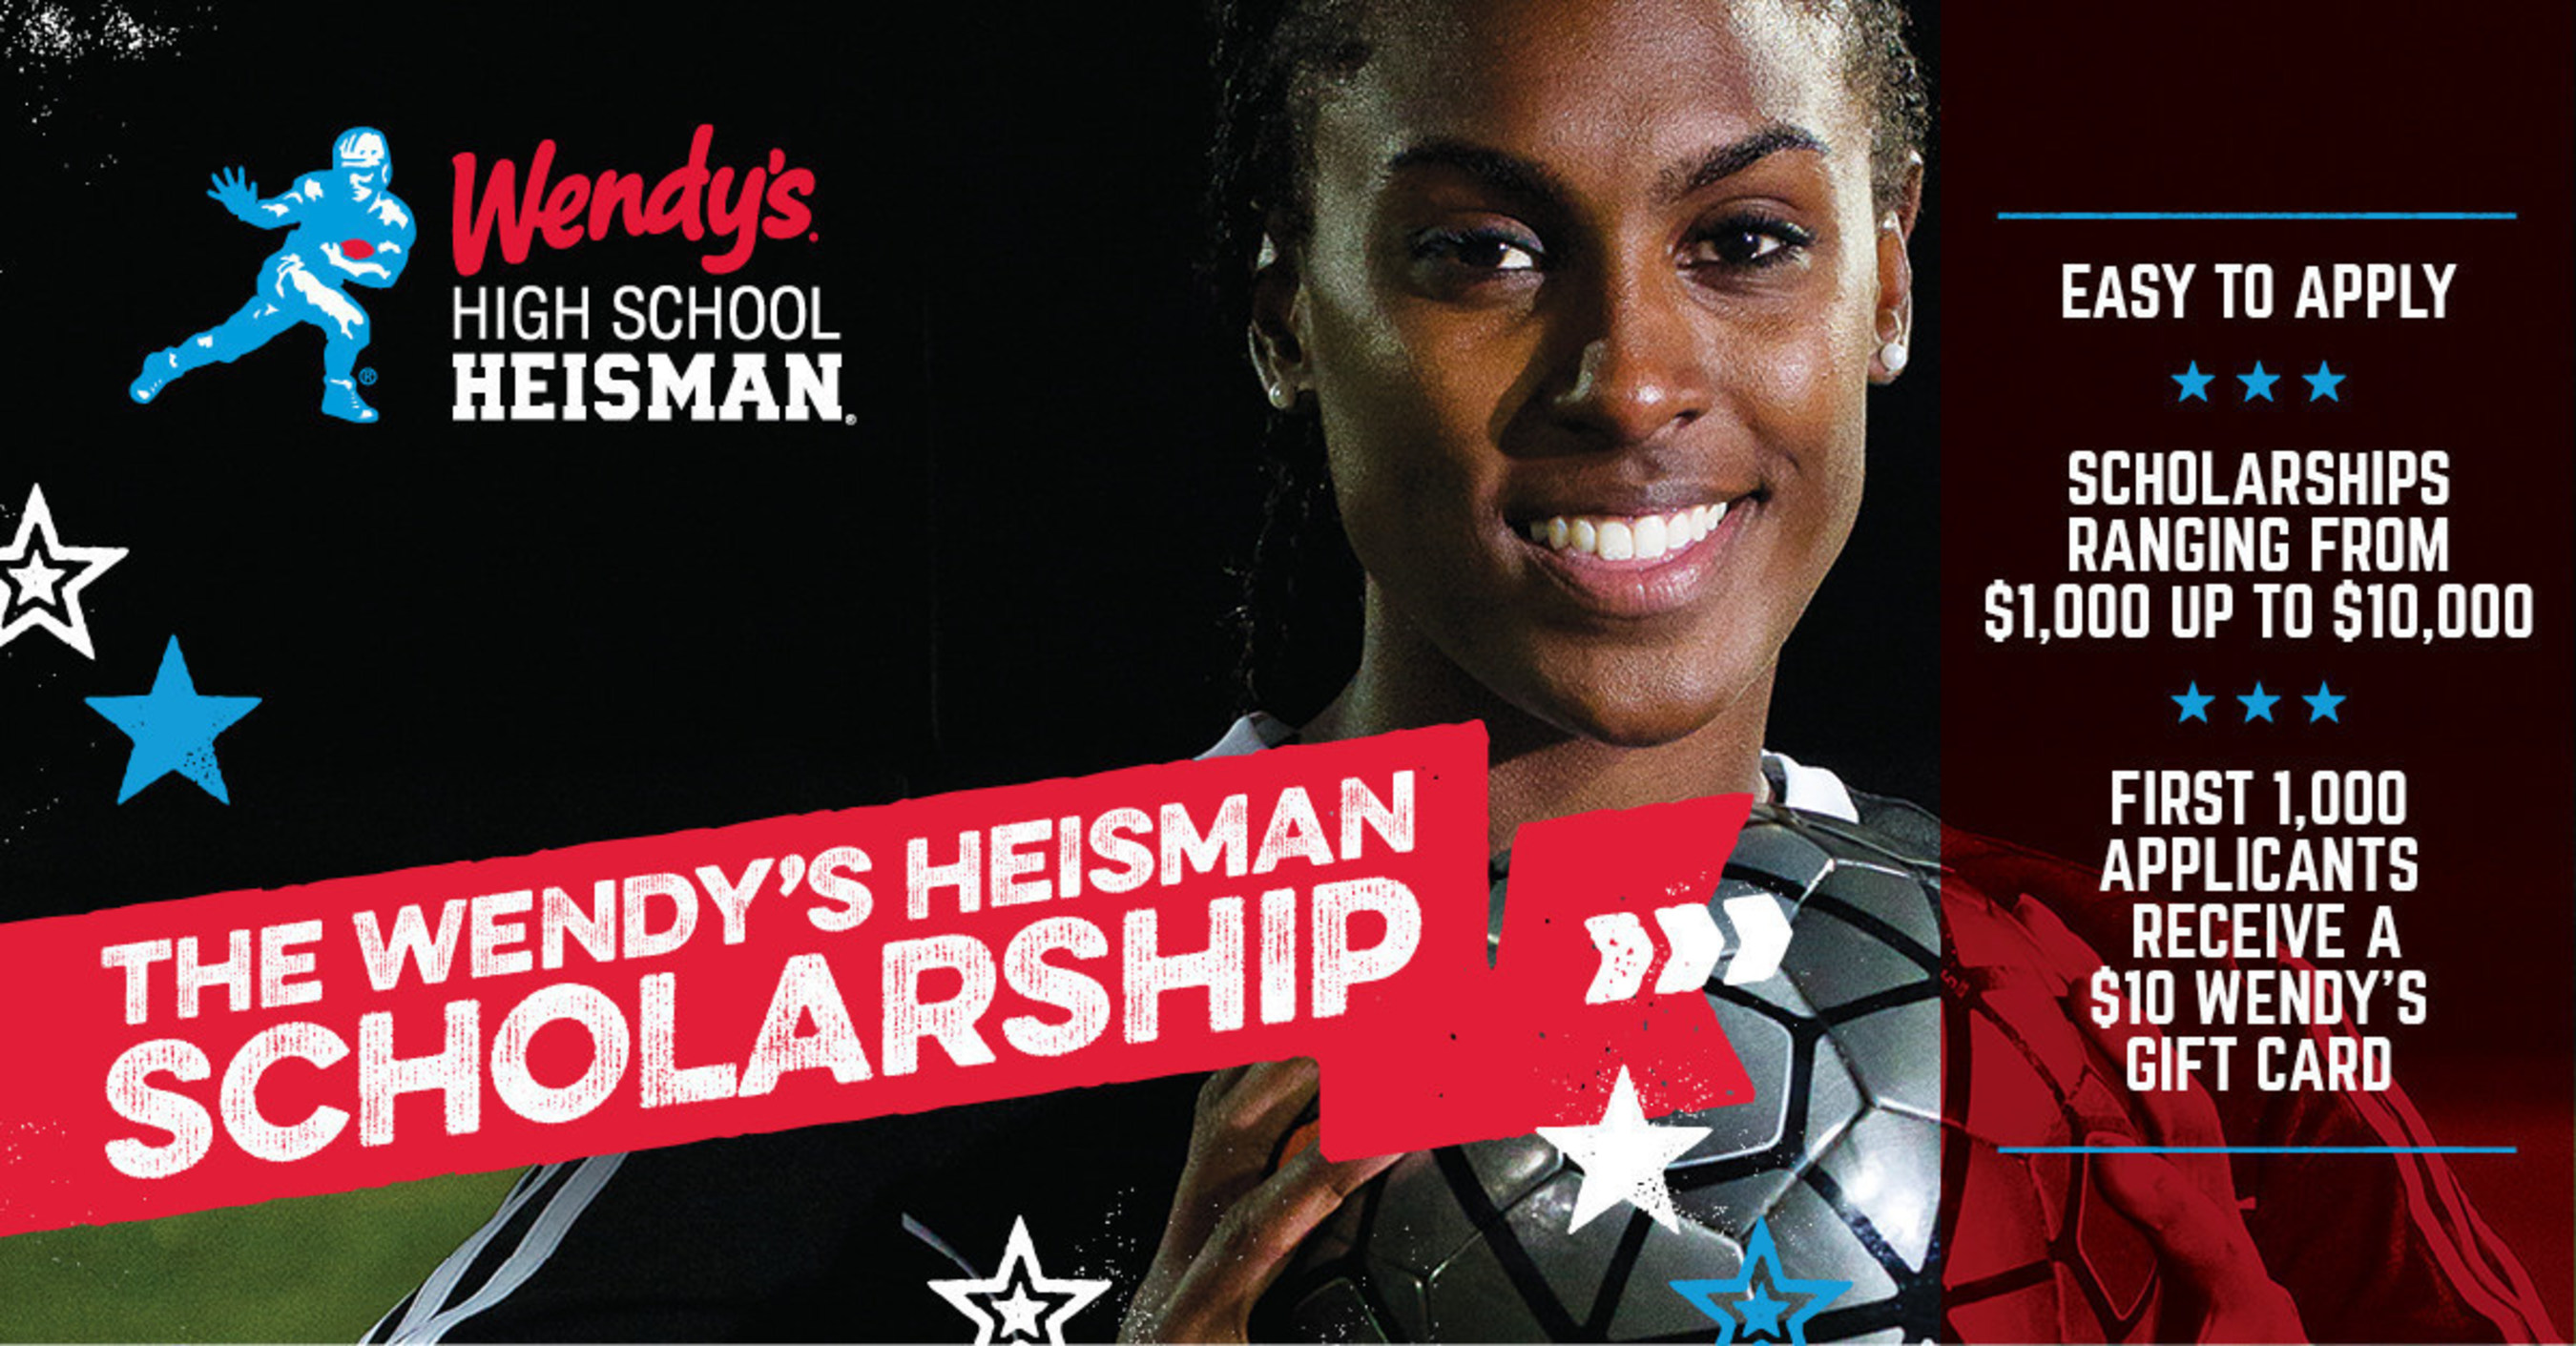 The Wendy's Heisman scholarship application is now open to scholar-athletes graduating with the class of 2017. The first 1,000 students to successfully submit an application will receive a $10 Wendy's gift card and will be one step closer to winning a $1,000-$10,000 scholarship. Applications close on October 3 so visit www.WendysHighSchoolHeisman.com to learn more about the program and access the online application.